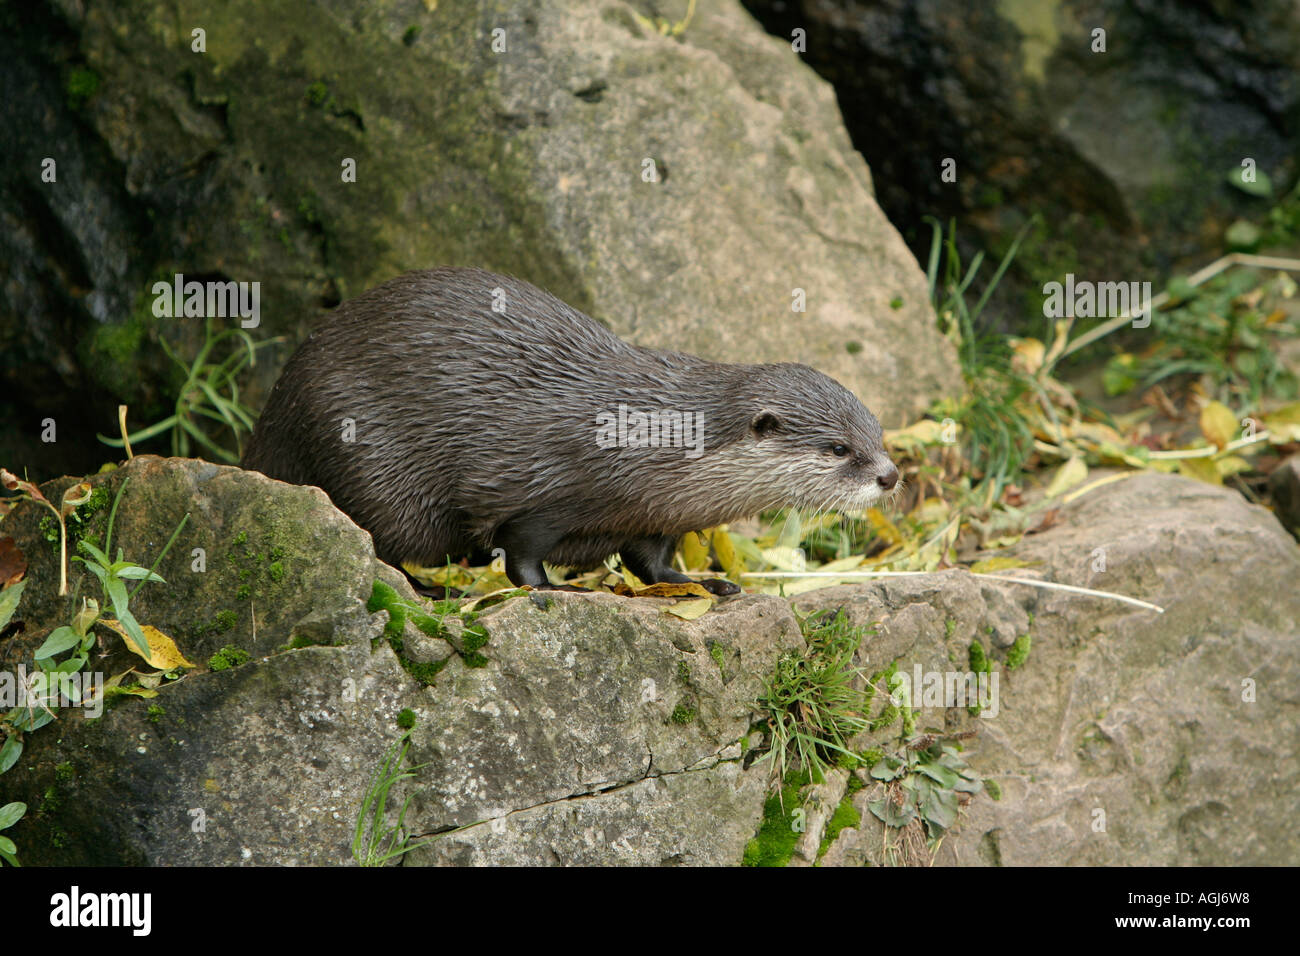 Oriental small clawed otter Stock Photo